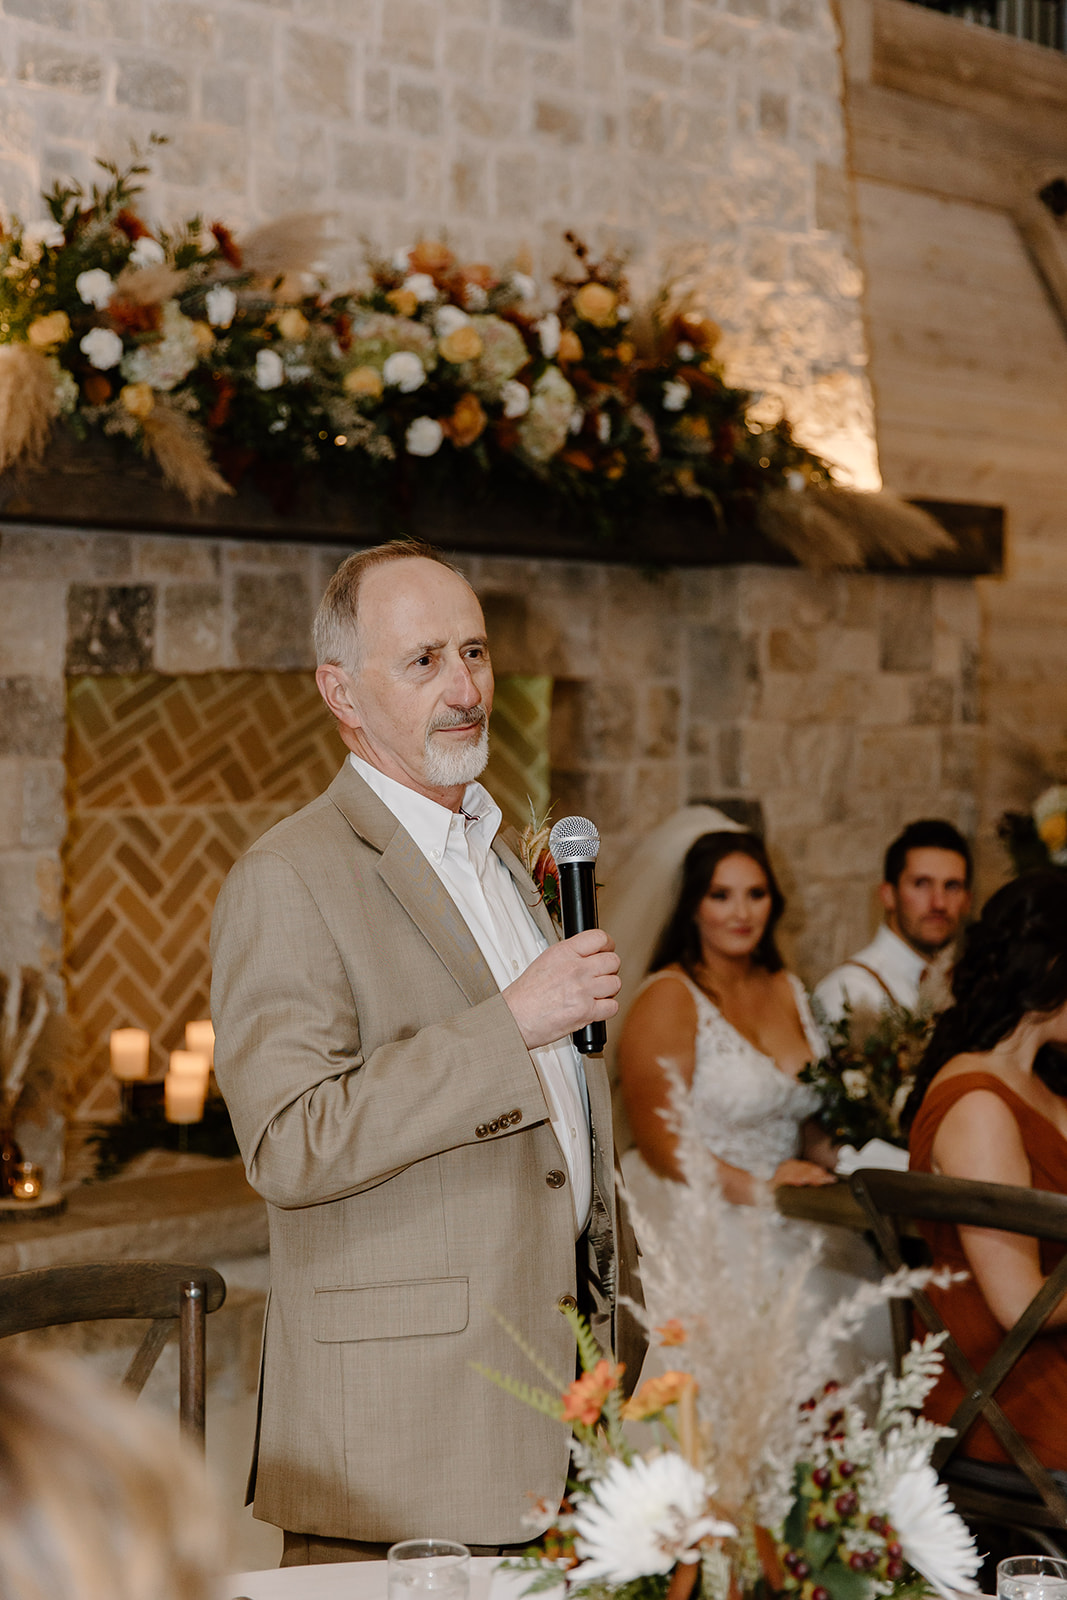 Father greets guests in front of the bride and groom